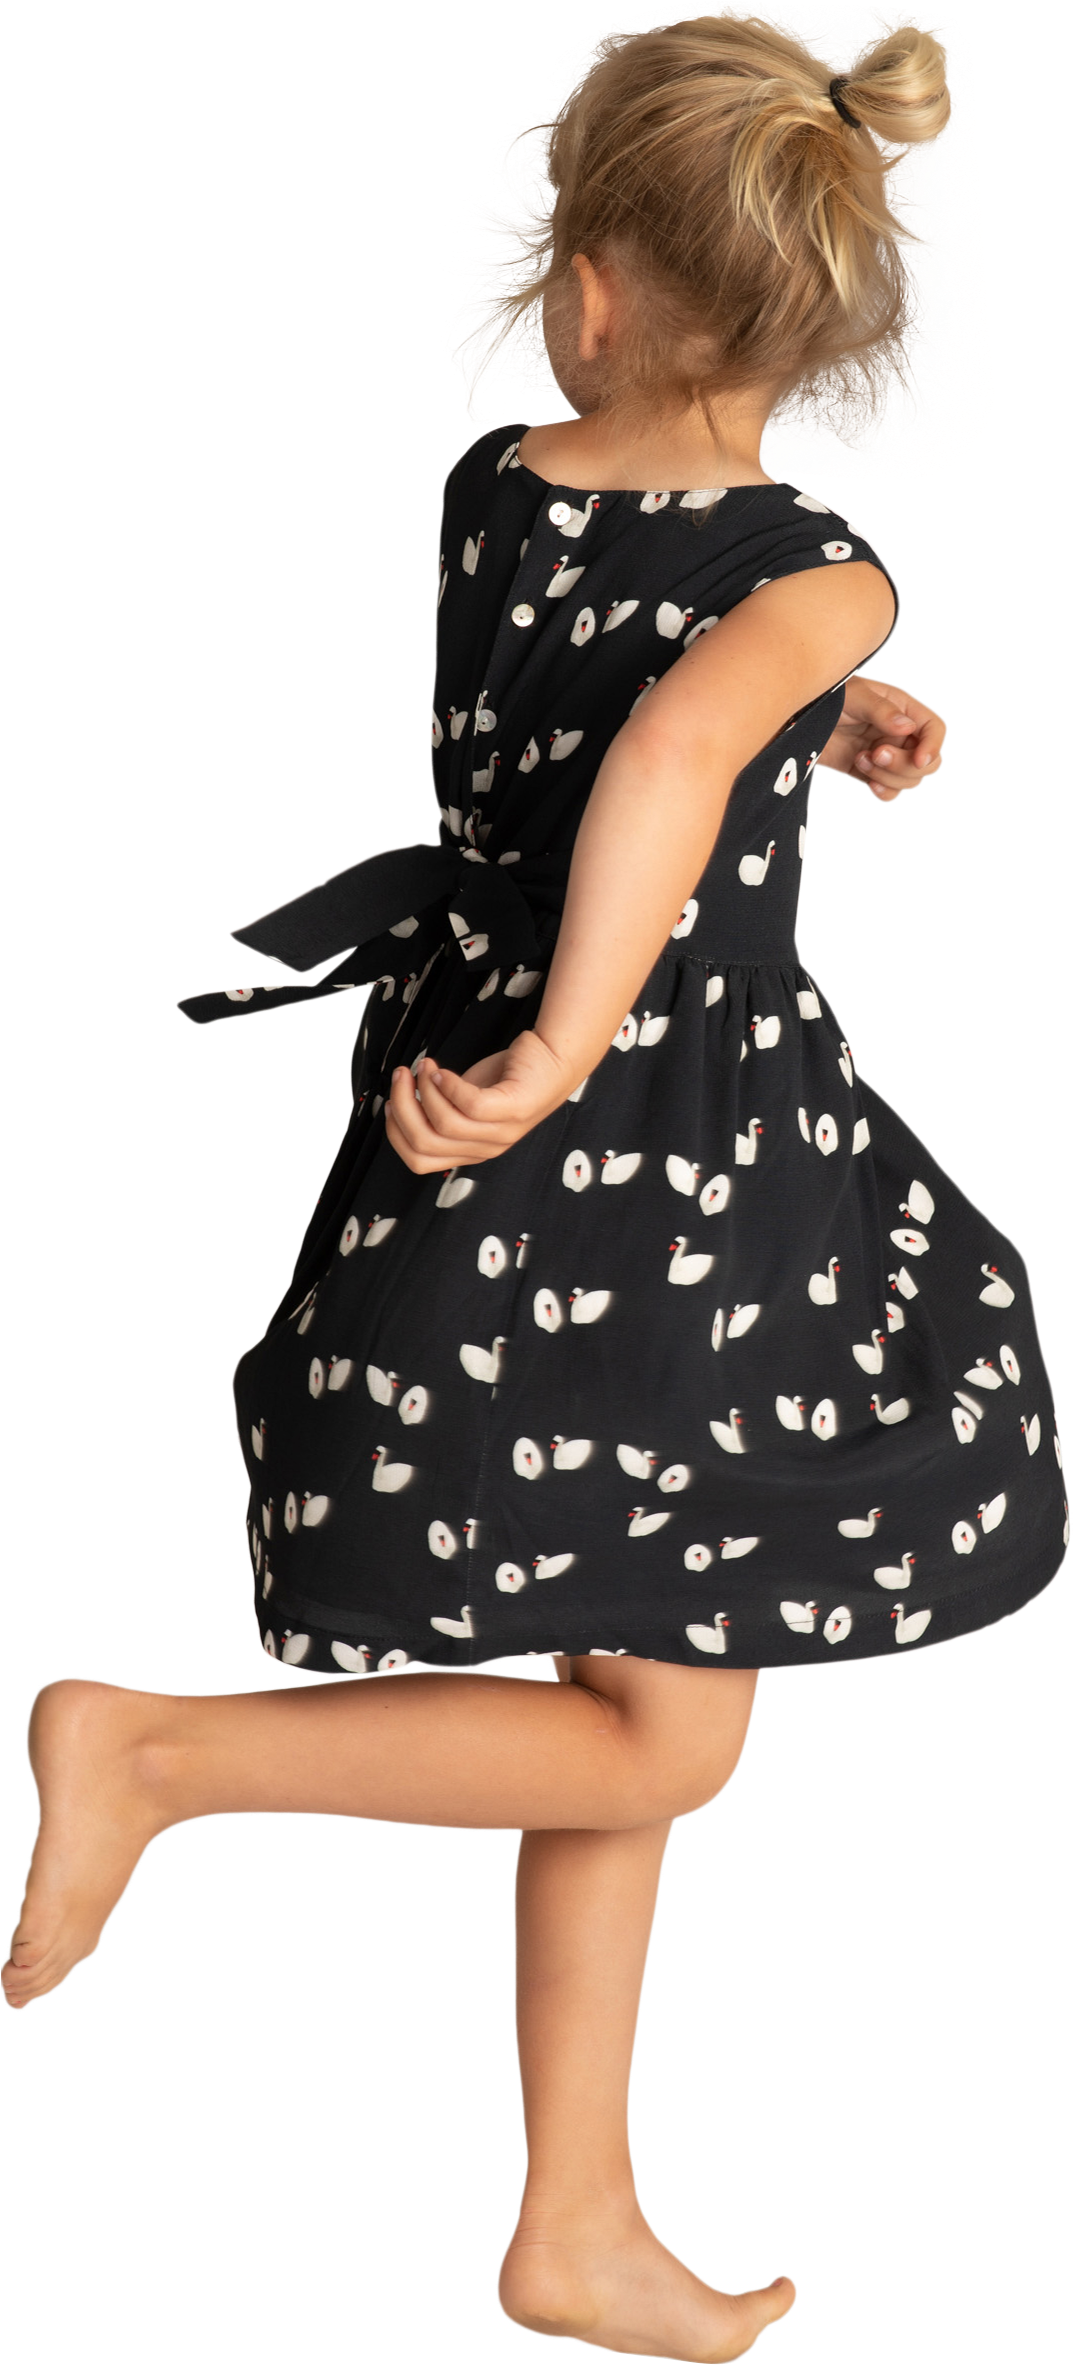 Little Dress Girl Free Clipart HQ PNG Image